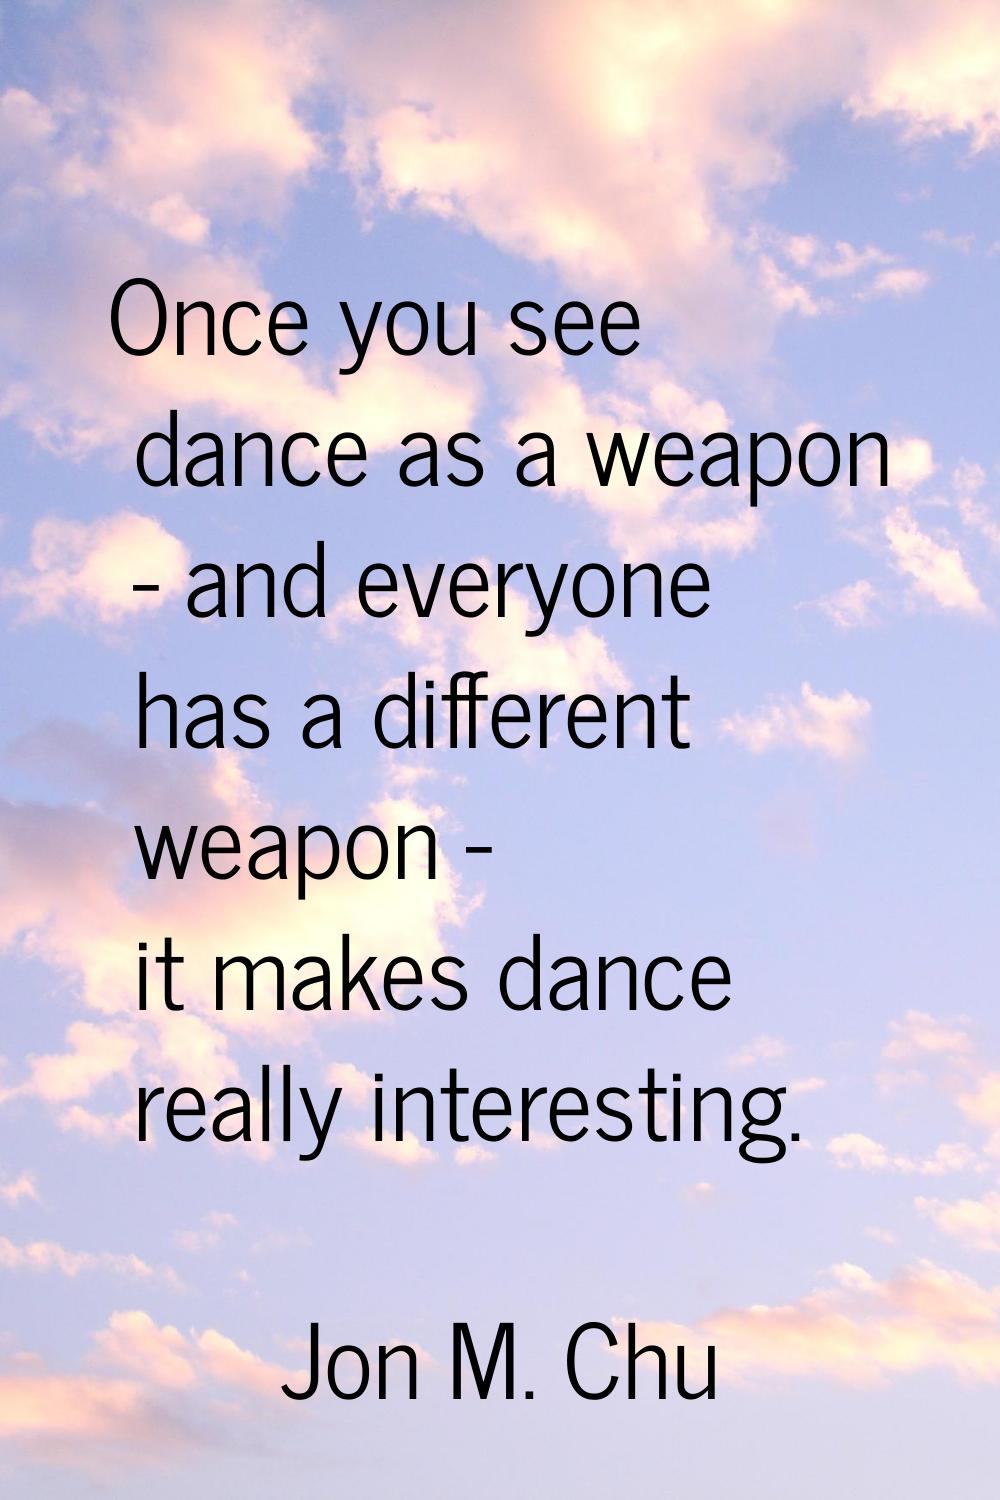 Once you see dance as a weapon - and everyone has a different weapon - it makes dance really intere